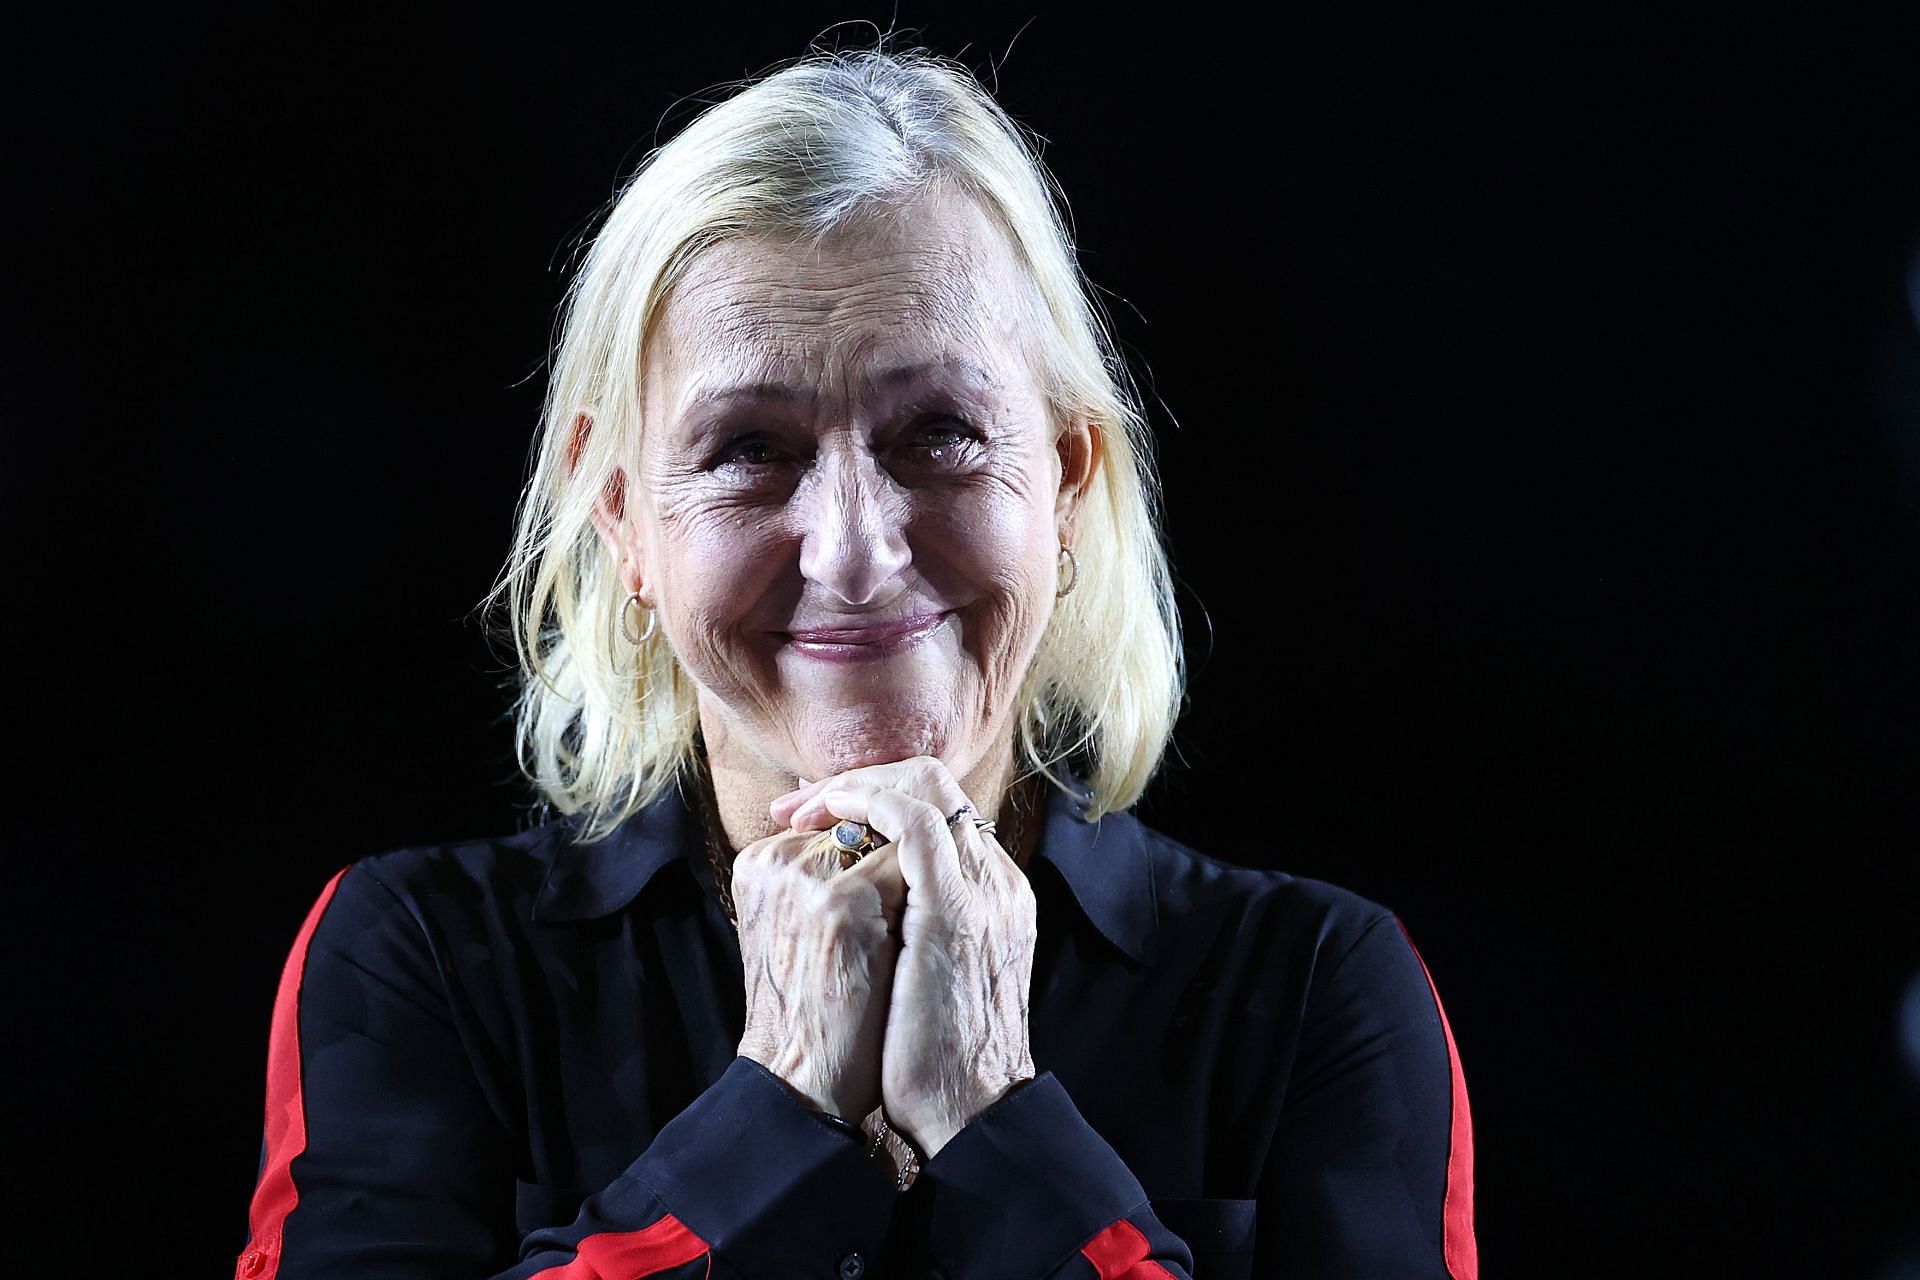 Martina Navratilova was moved to tears during the speech.